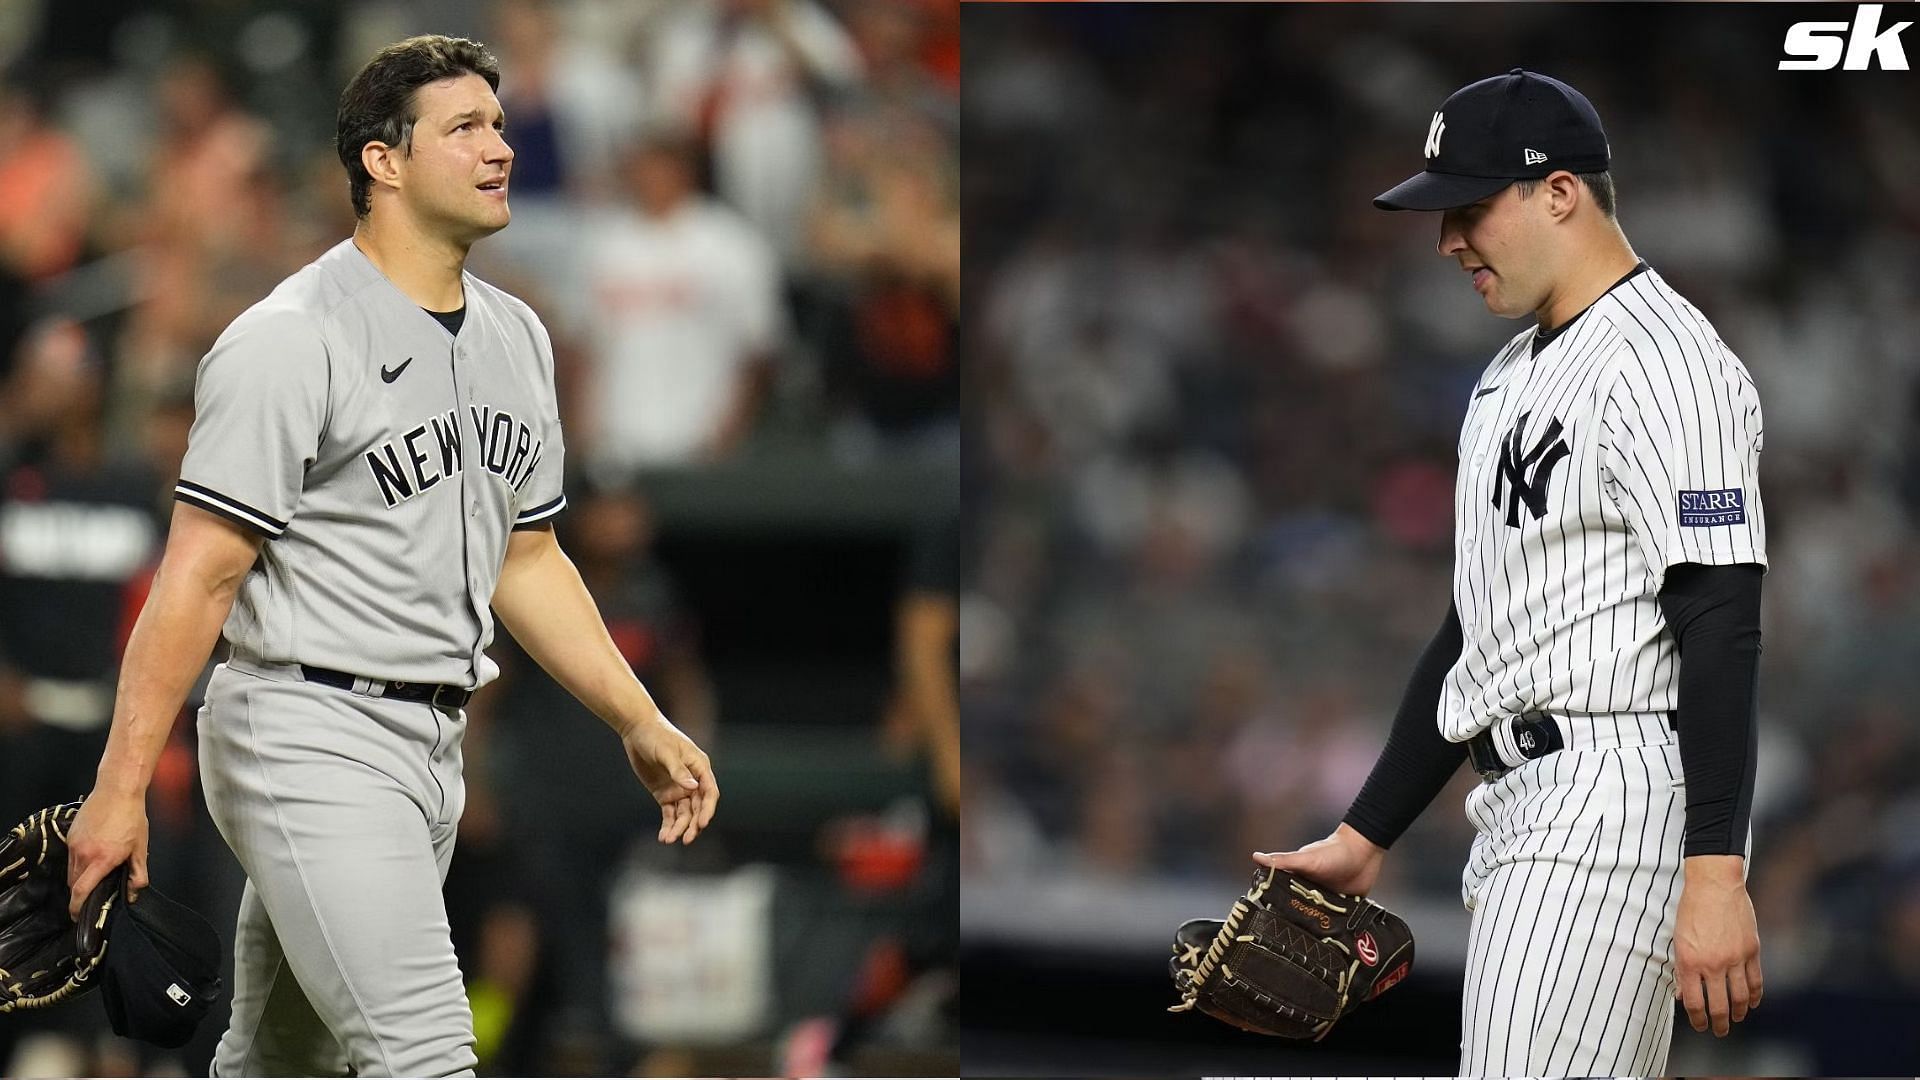 Yankees' Tommy Kahnle shares insights on bouncing back after rough